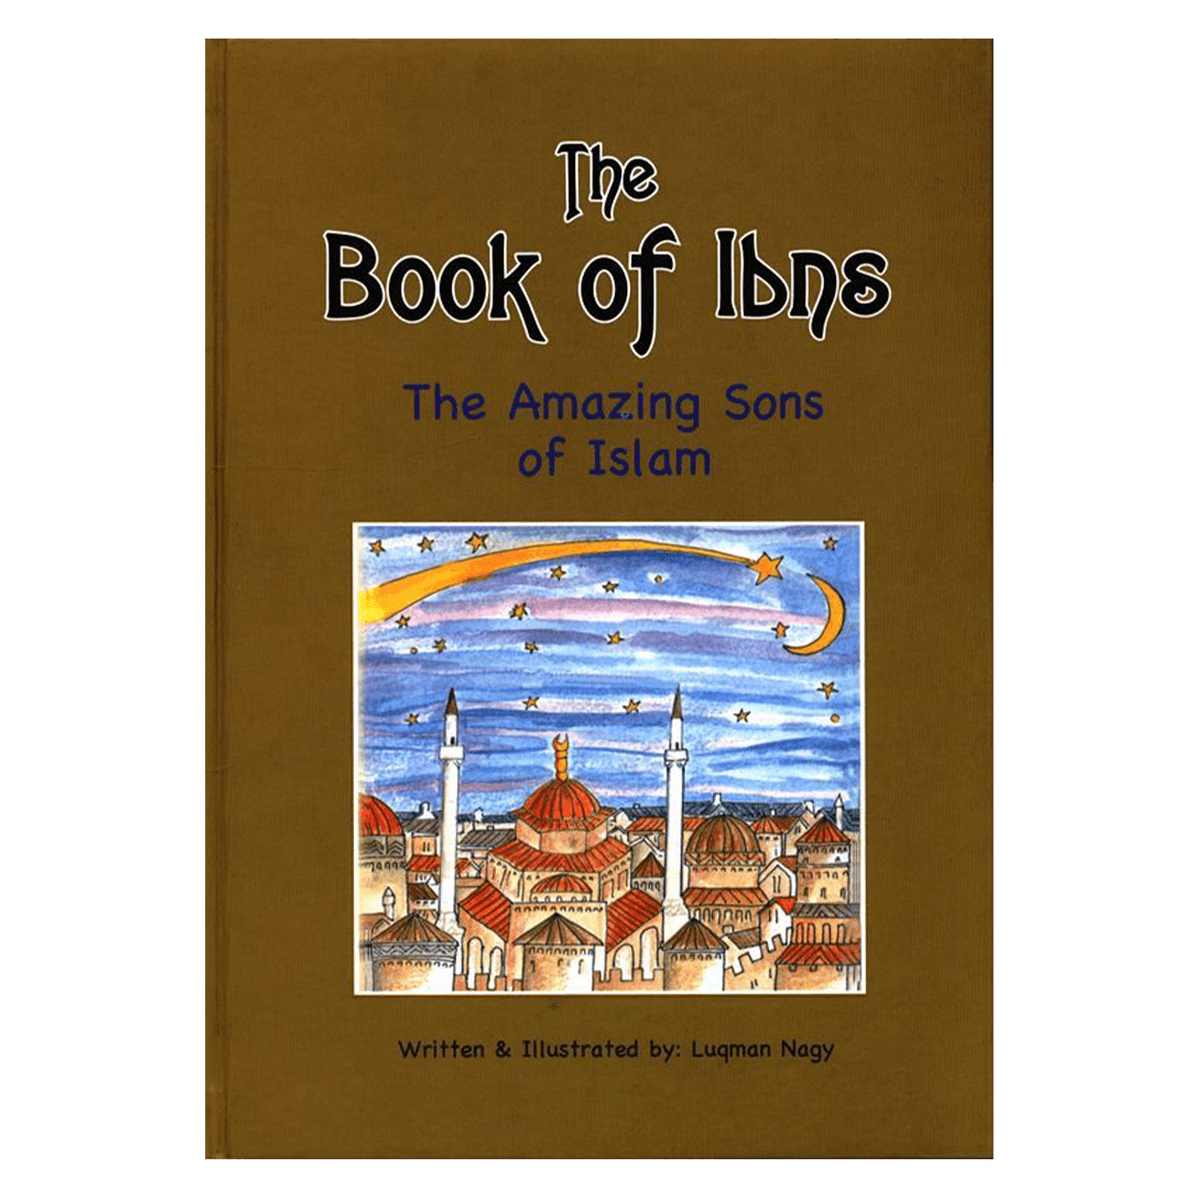 The Book of Ibns (The Amazing Sons of Islam)